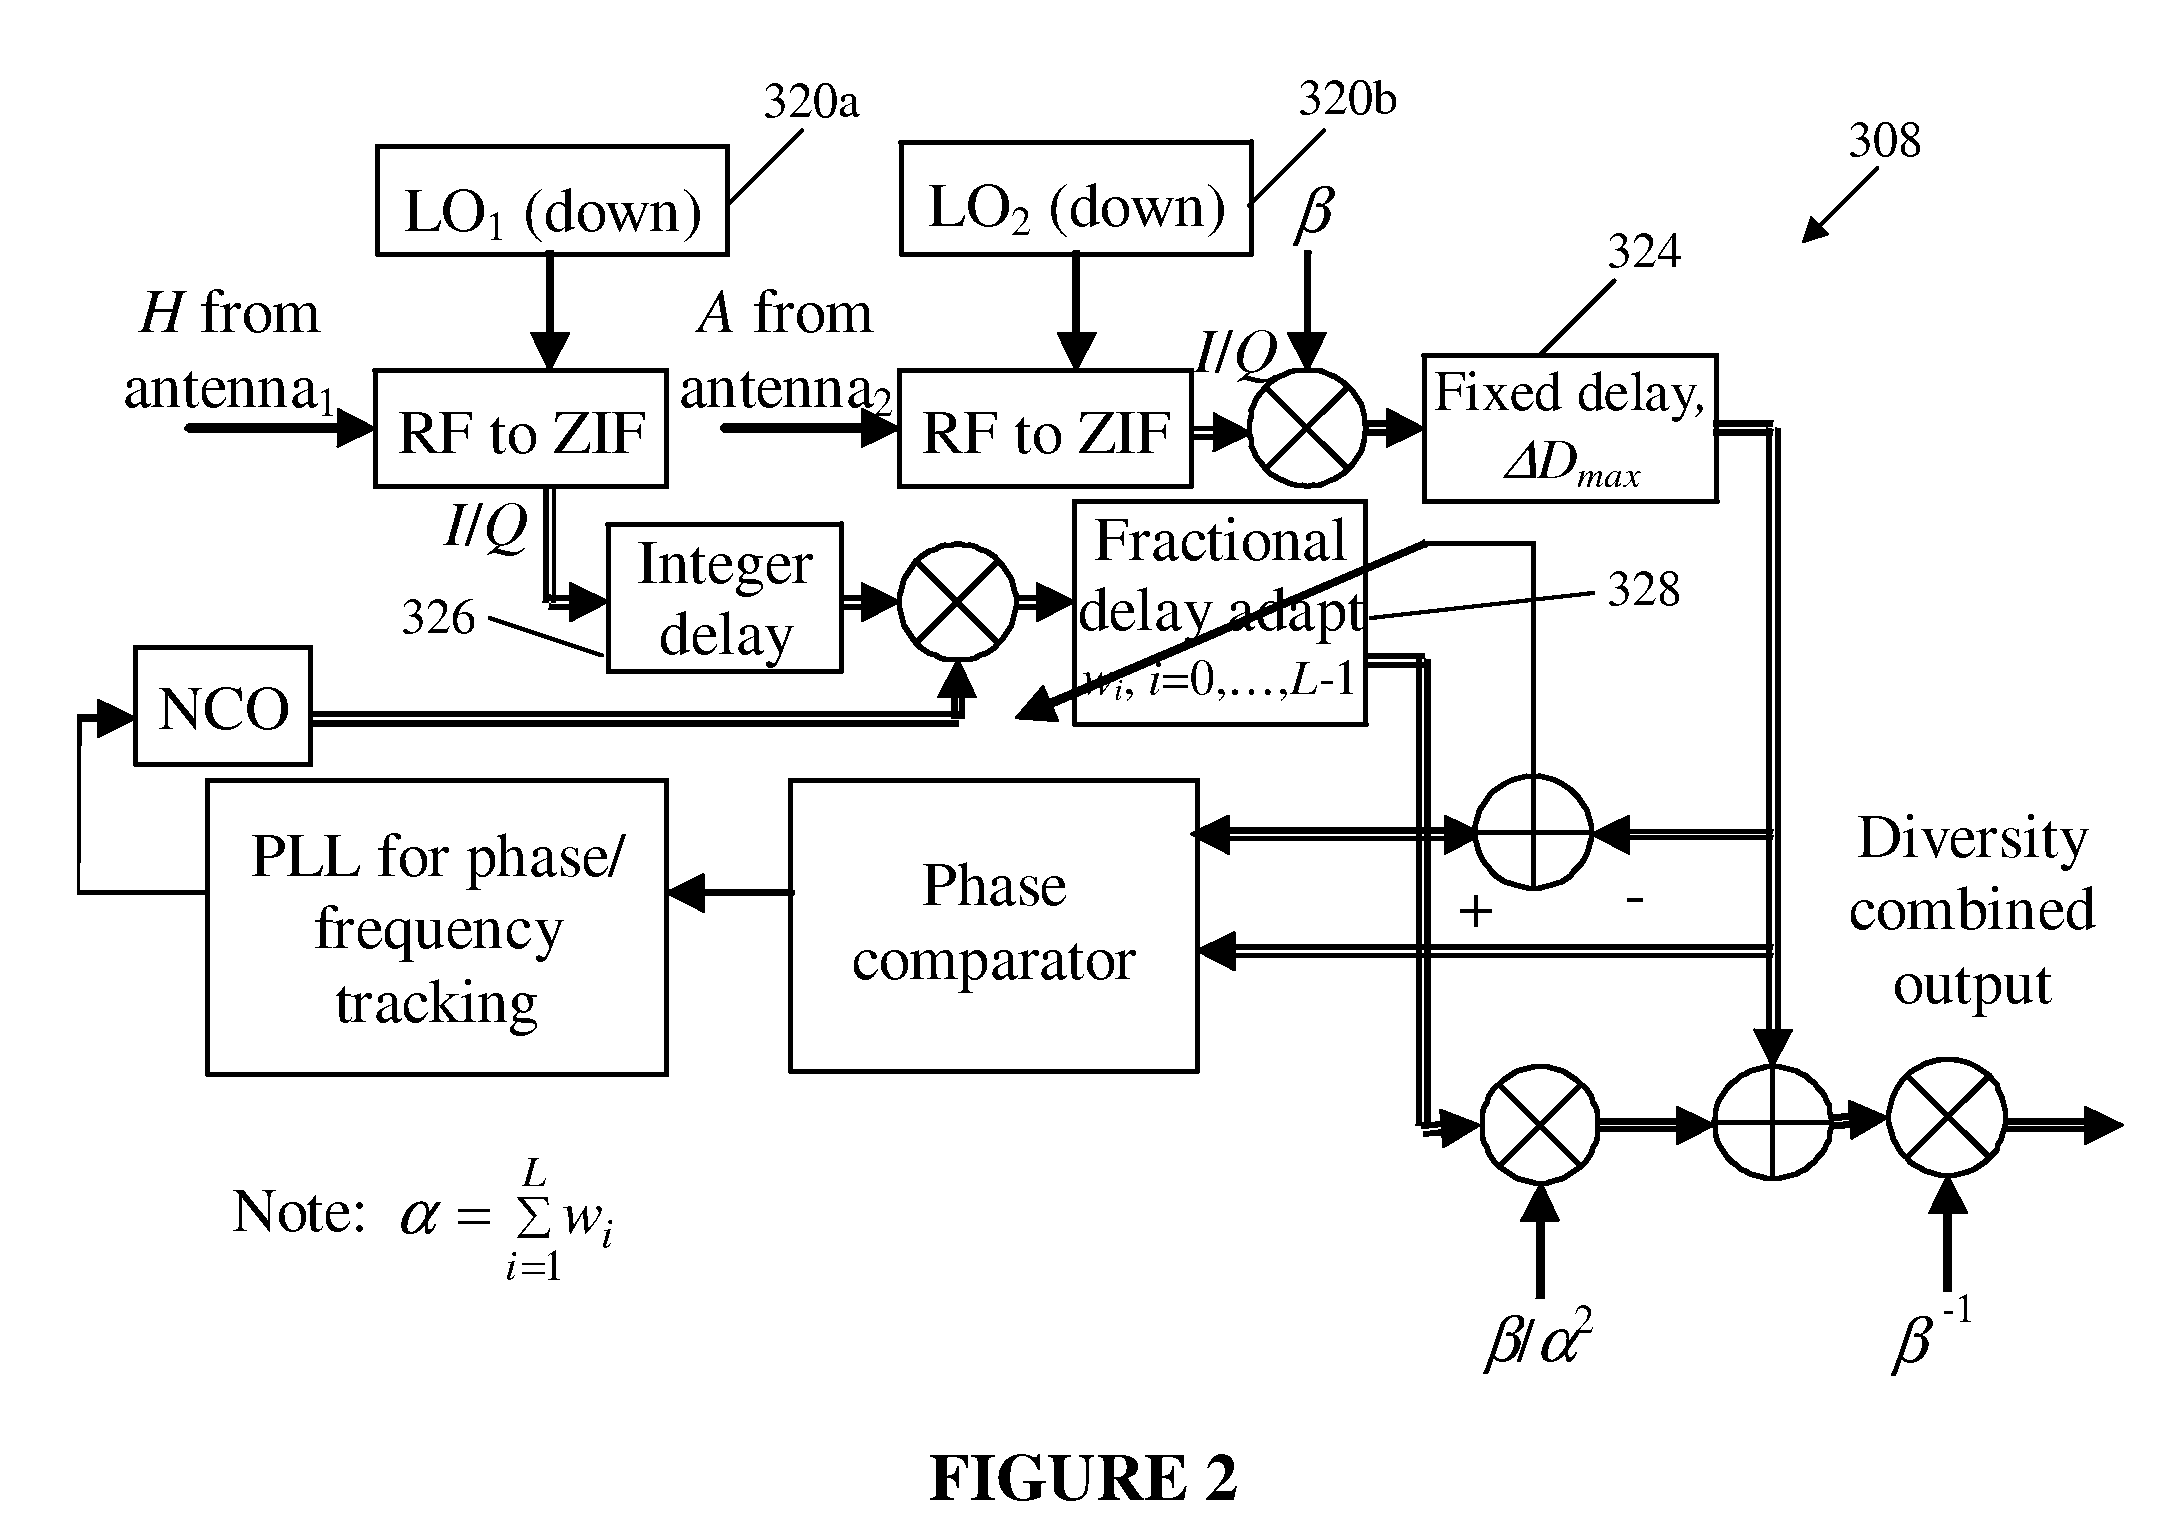 System and method for enabling ultra small aperture communication antenna using spectral replication and coherent frequency and phase combining